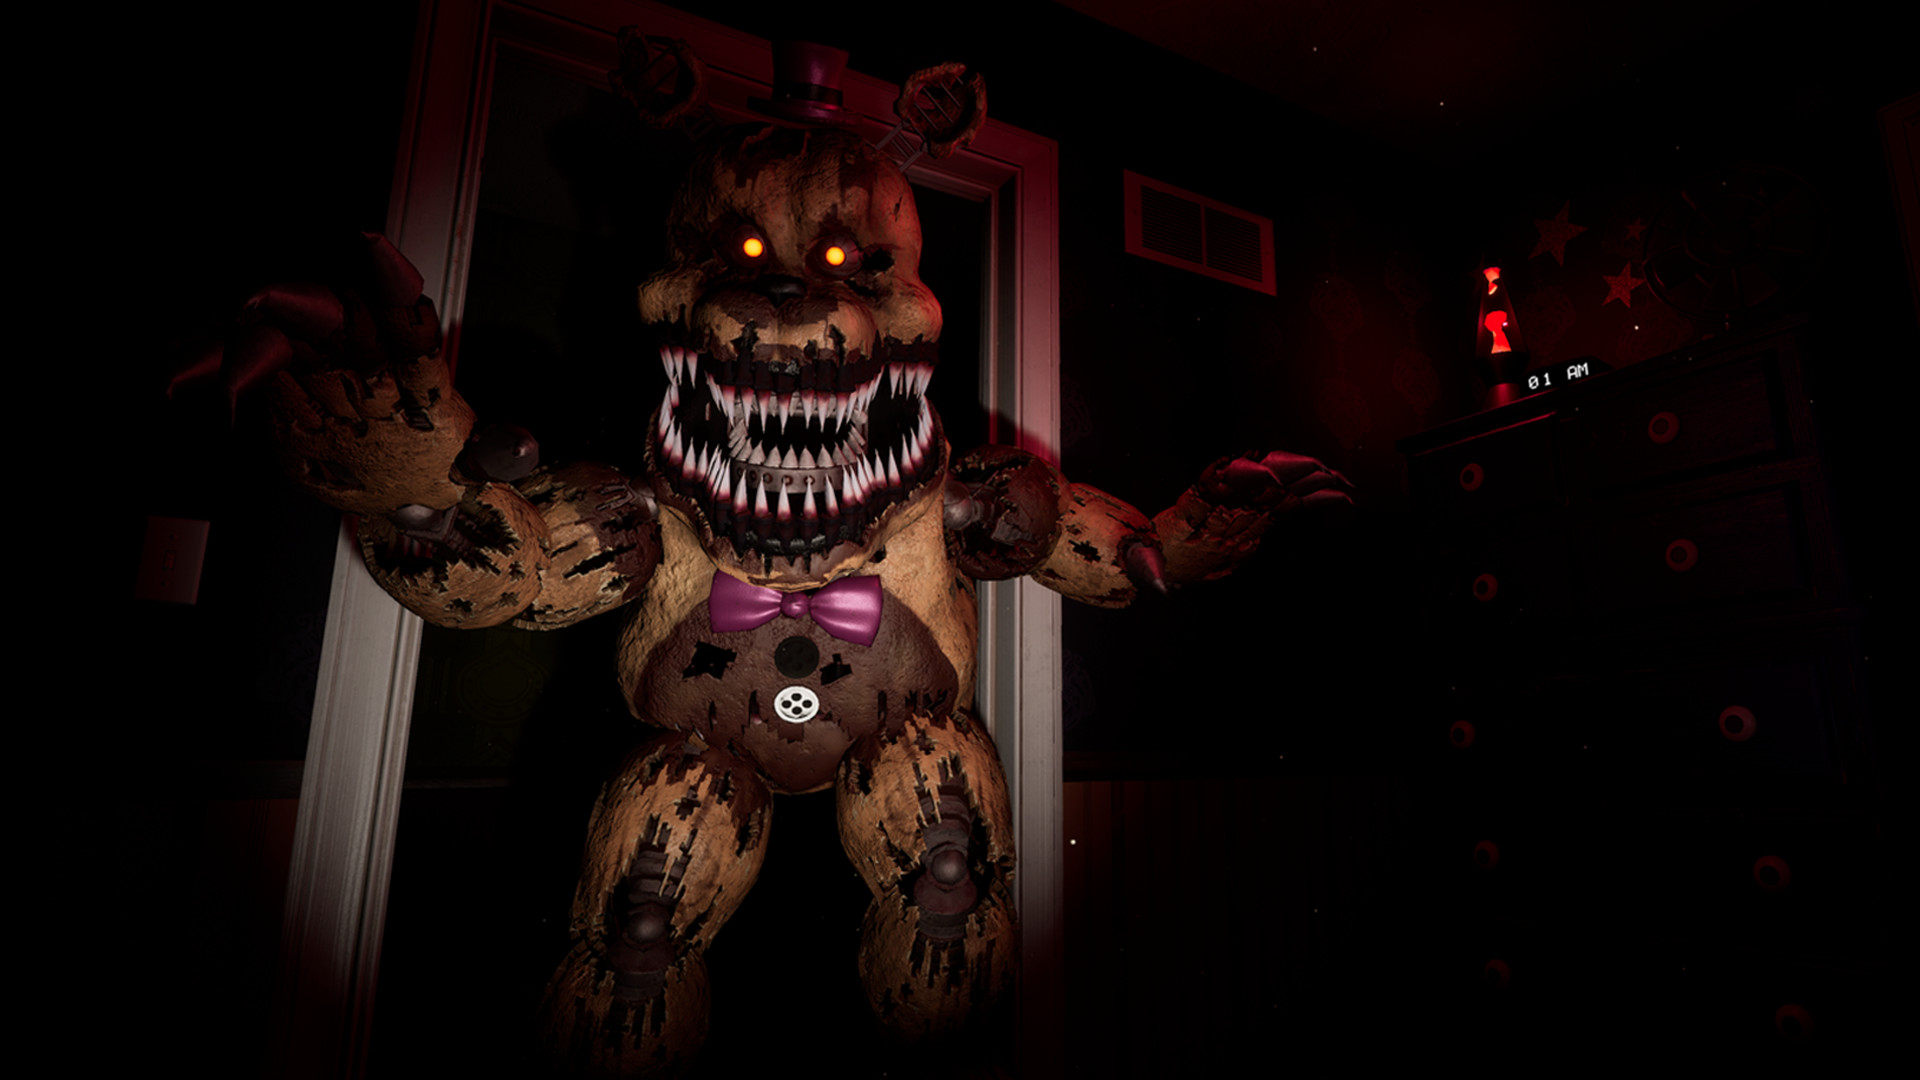 Five Nights at Freddy's: Help Wanted 2 Free Download » SteamRIP